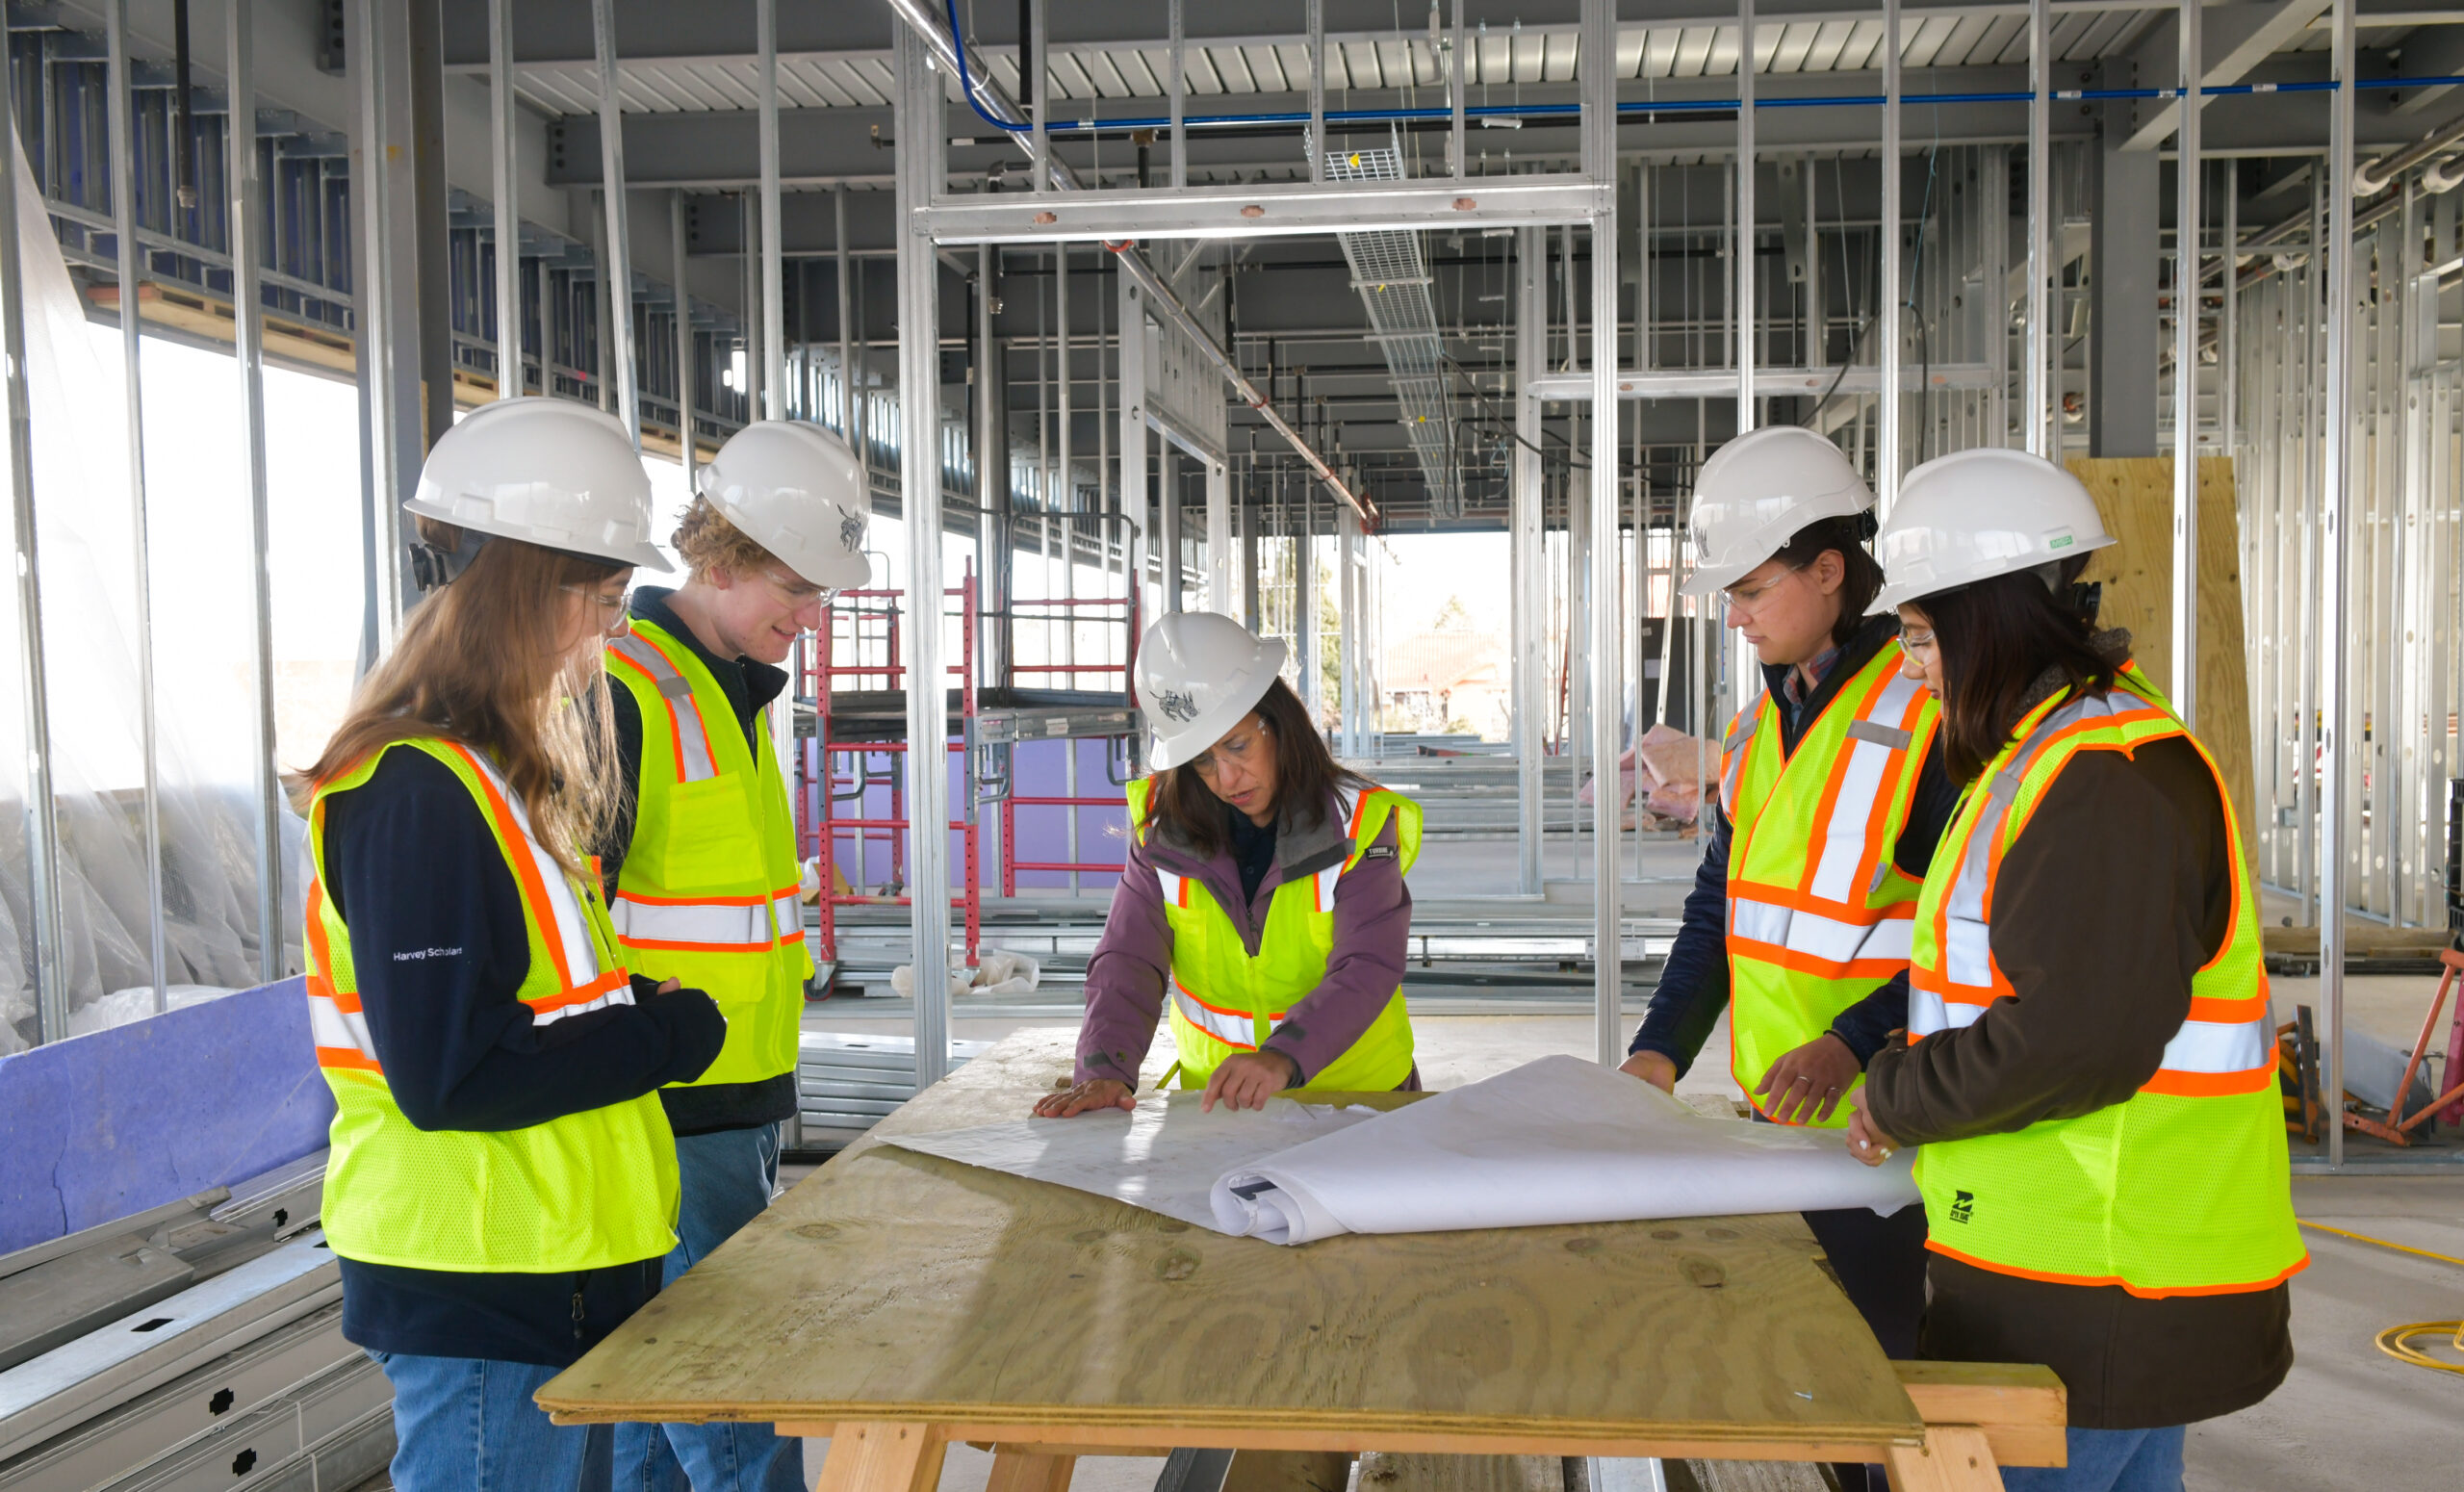 Professor at a table in a construction zone pointing out something on a plan to four students.